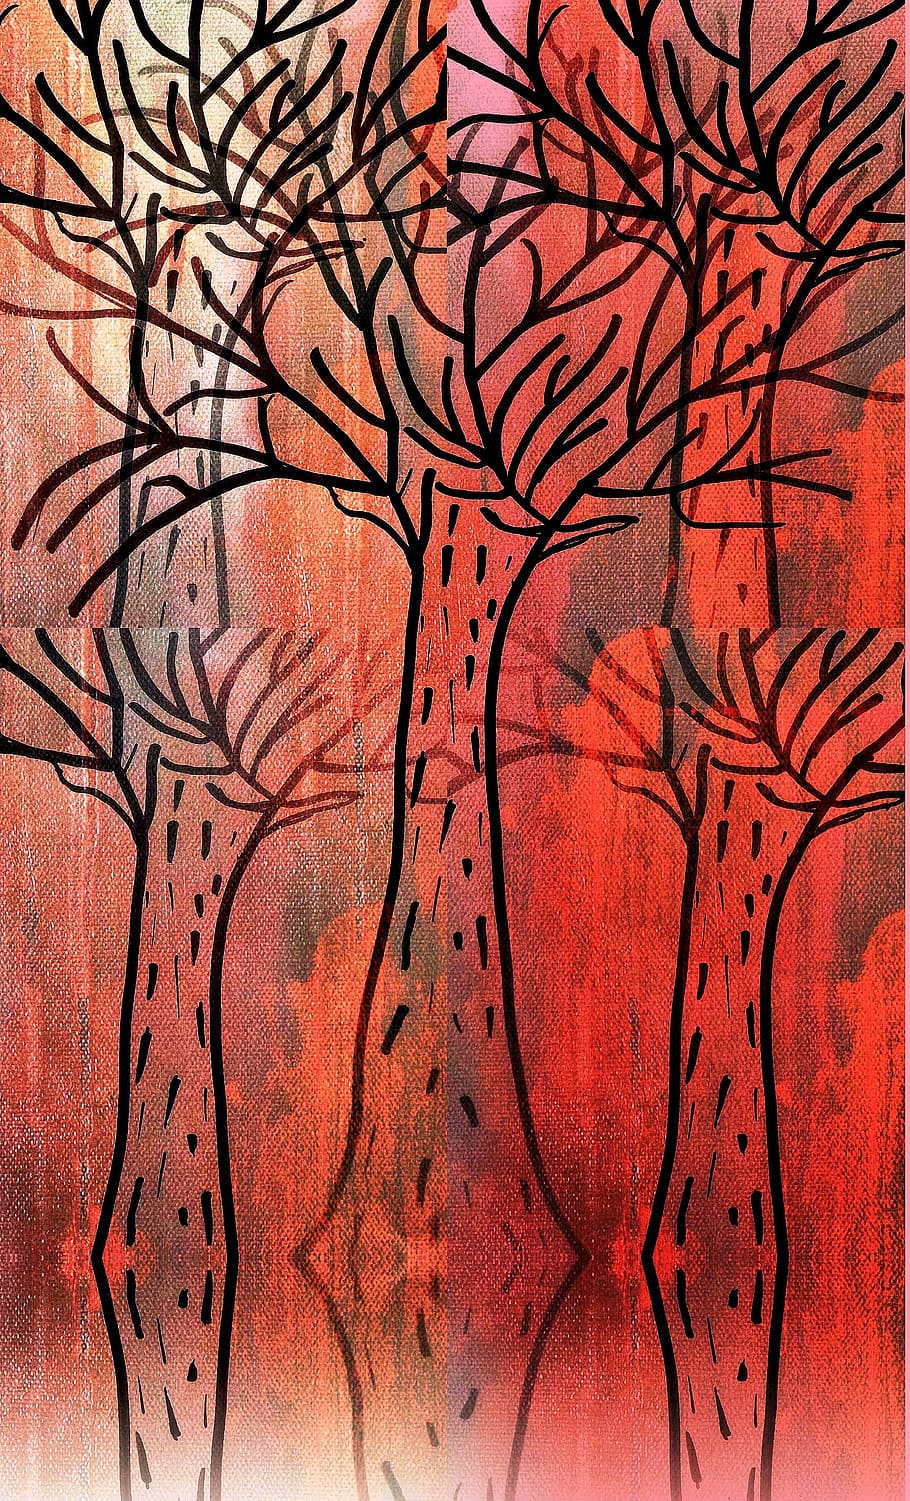 modern art, painting, trees, forest, grow, red, art, abstract, full frame, backgrounds